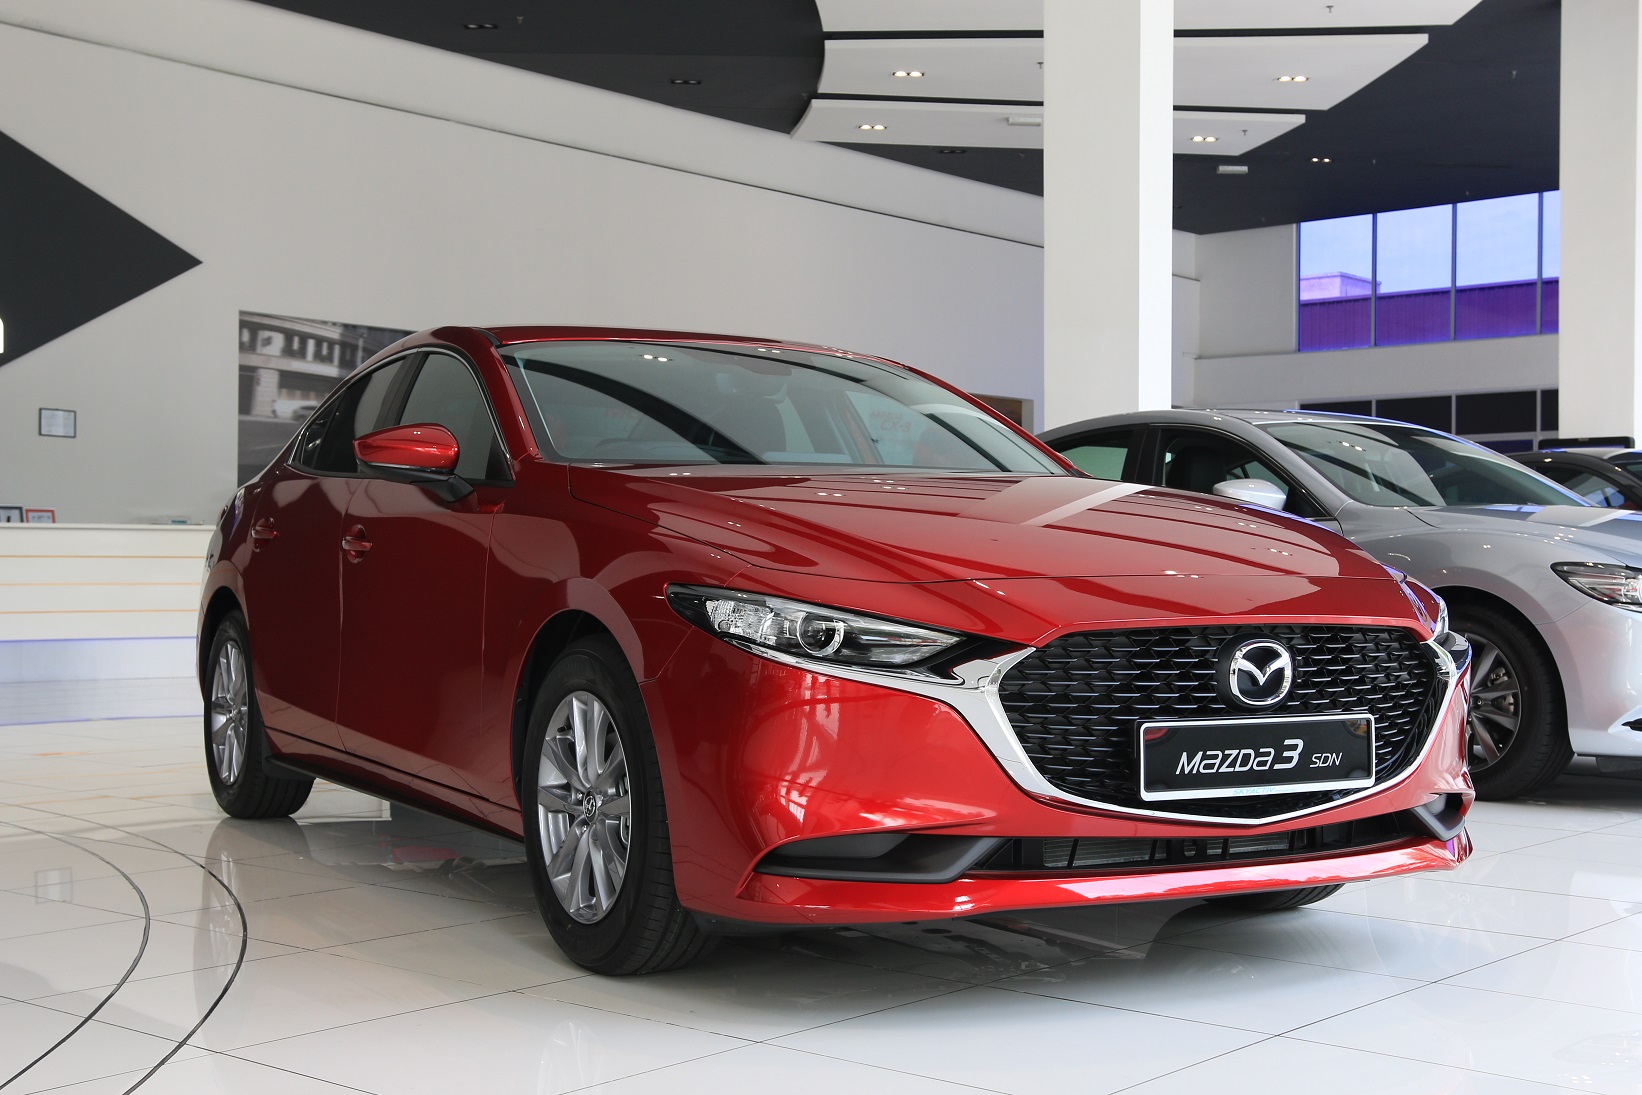 Five things we know about the Malaysian-spec 2019 Mazda3